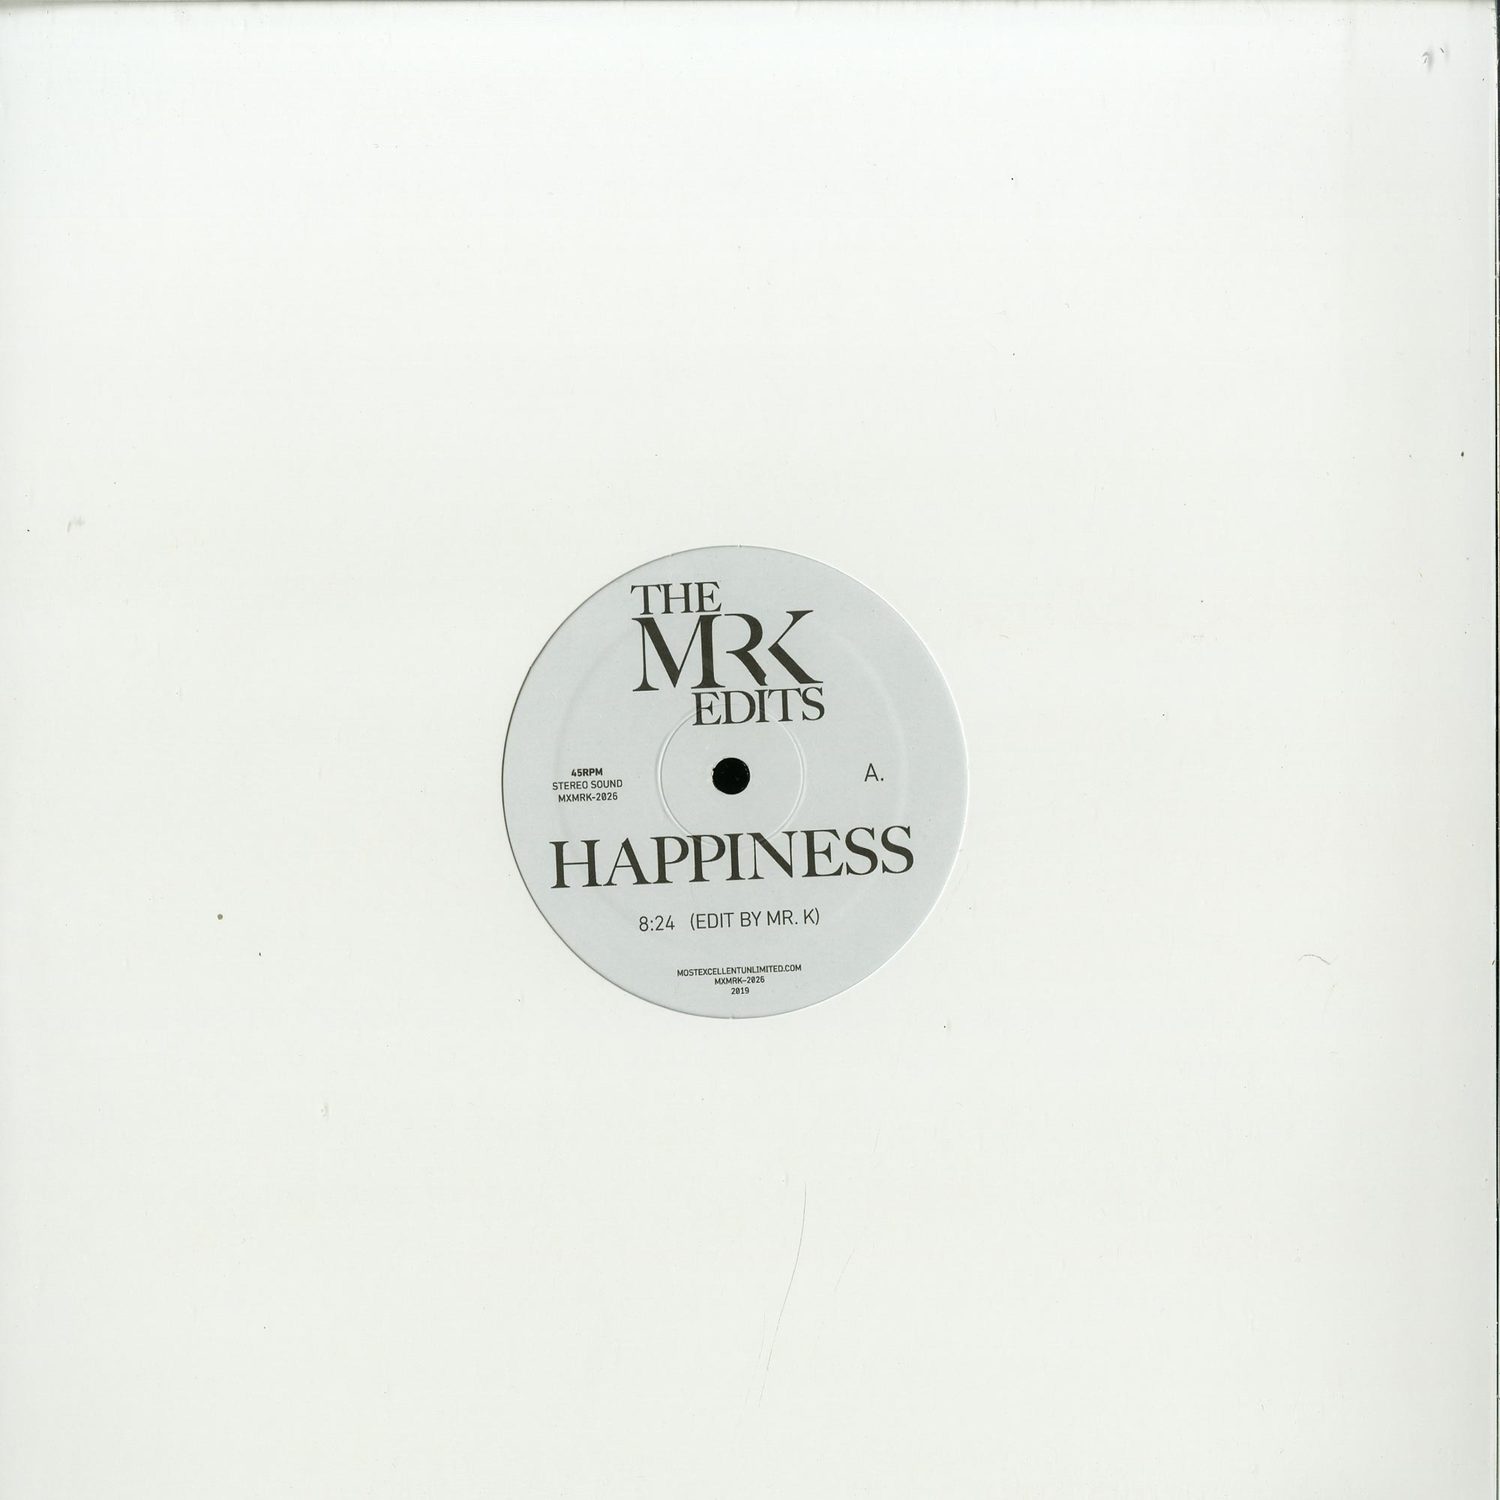 Edits by Mr. K - Happiness b/w As